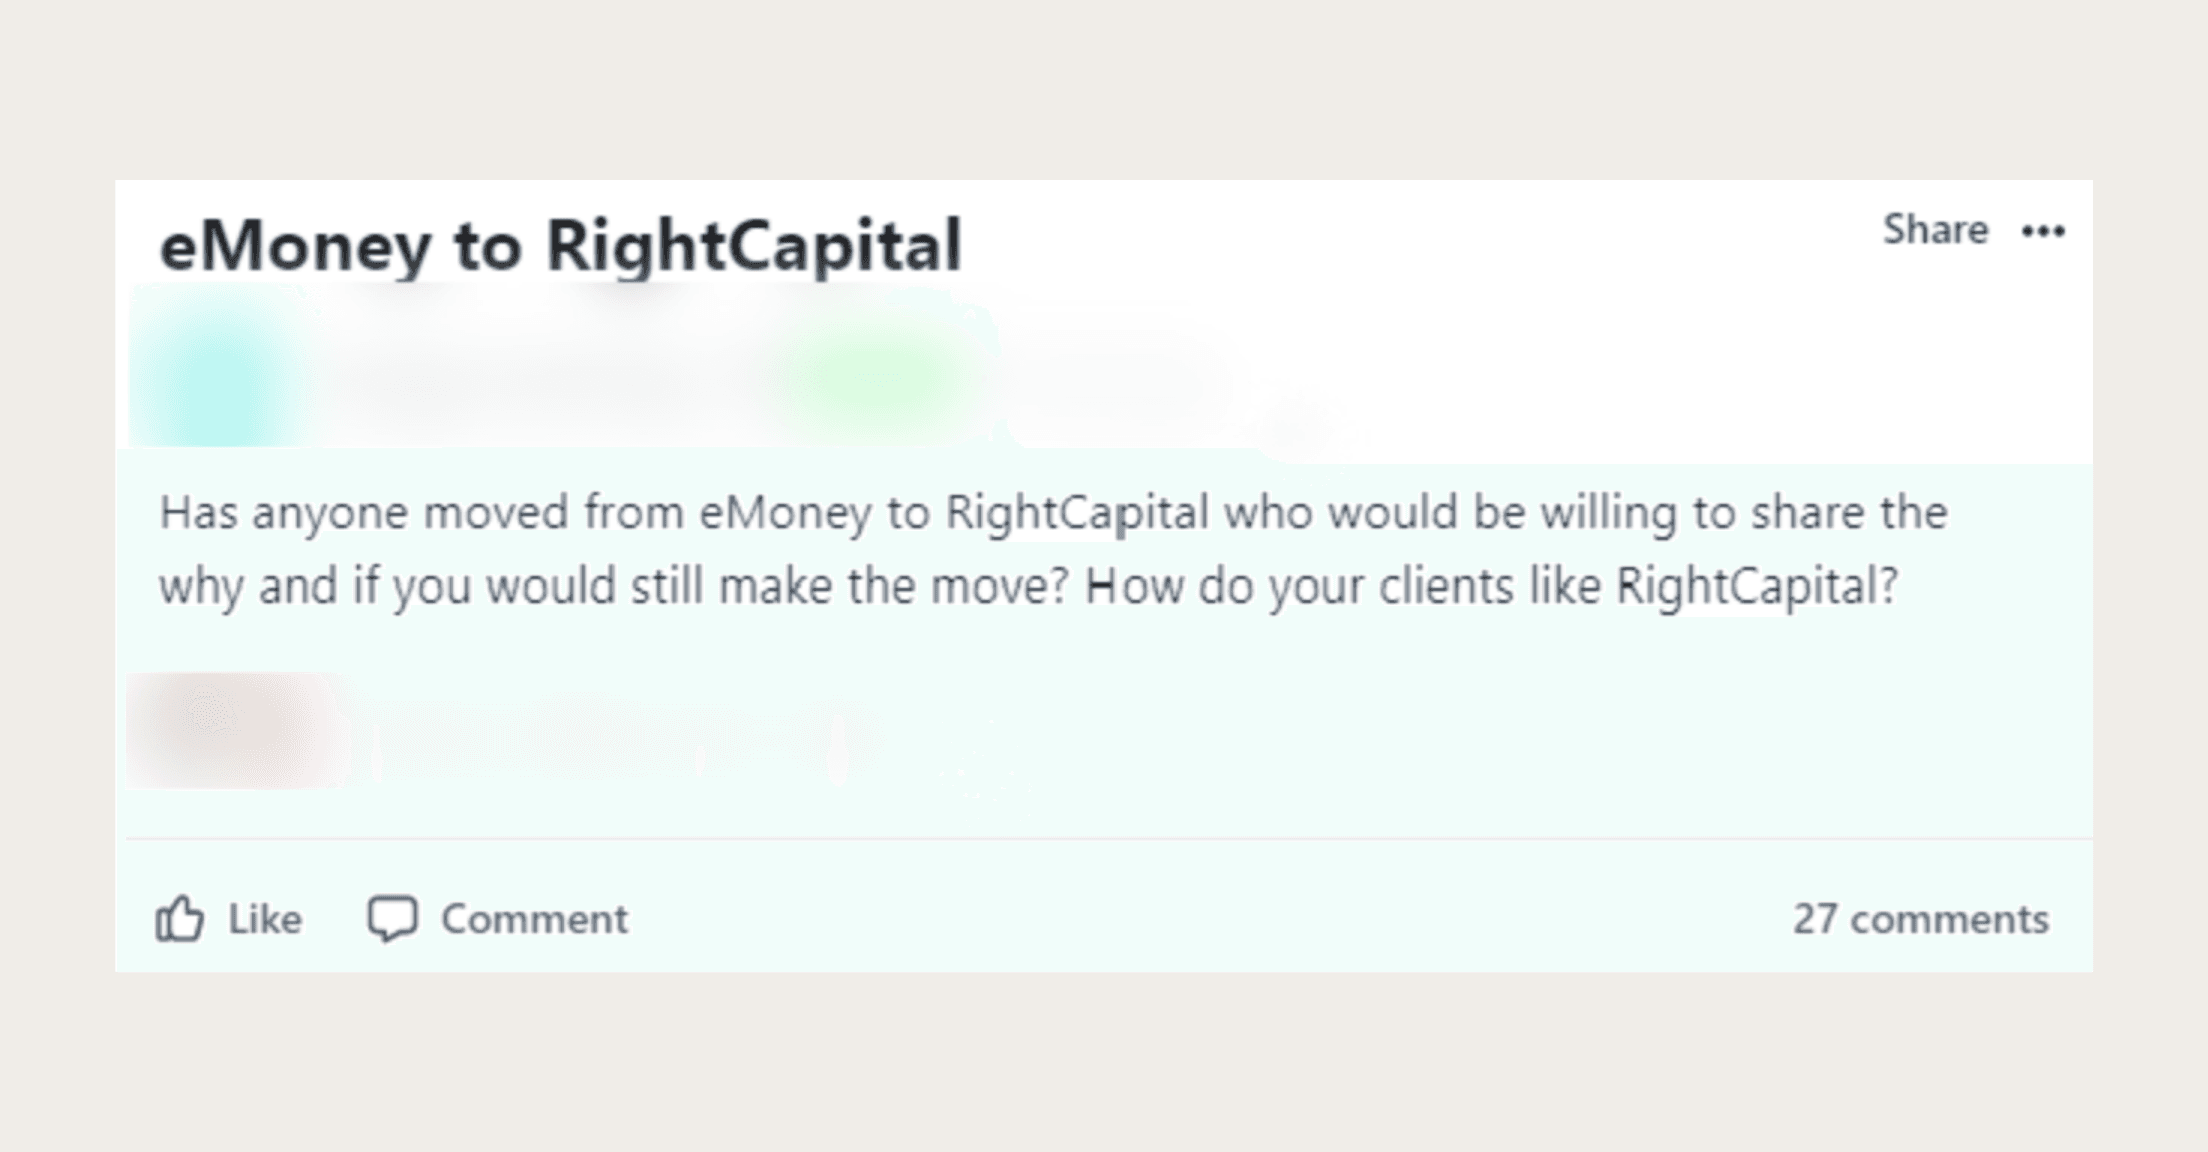 Social media post where someone asks, "Has anyone moved from eMoney to RightCapital who would be willing to share the why and if you would still make the move? How do your clients like RightCapital?"